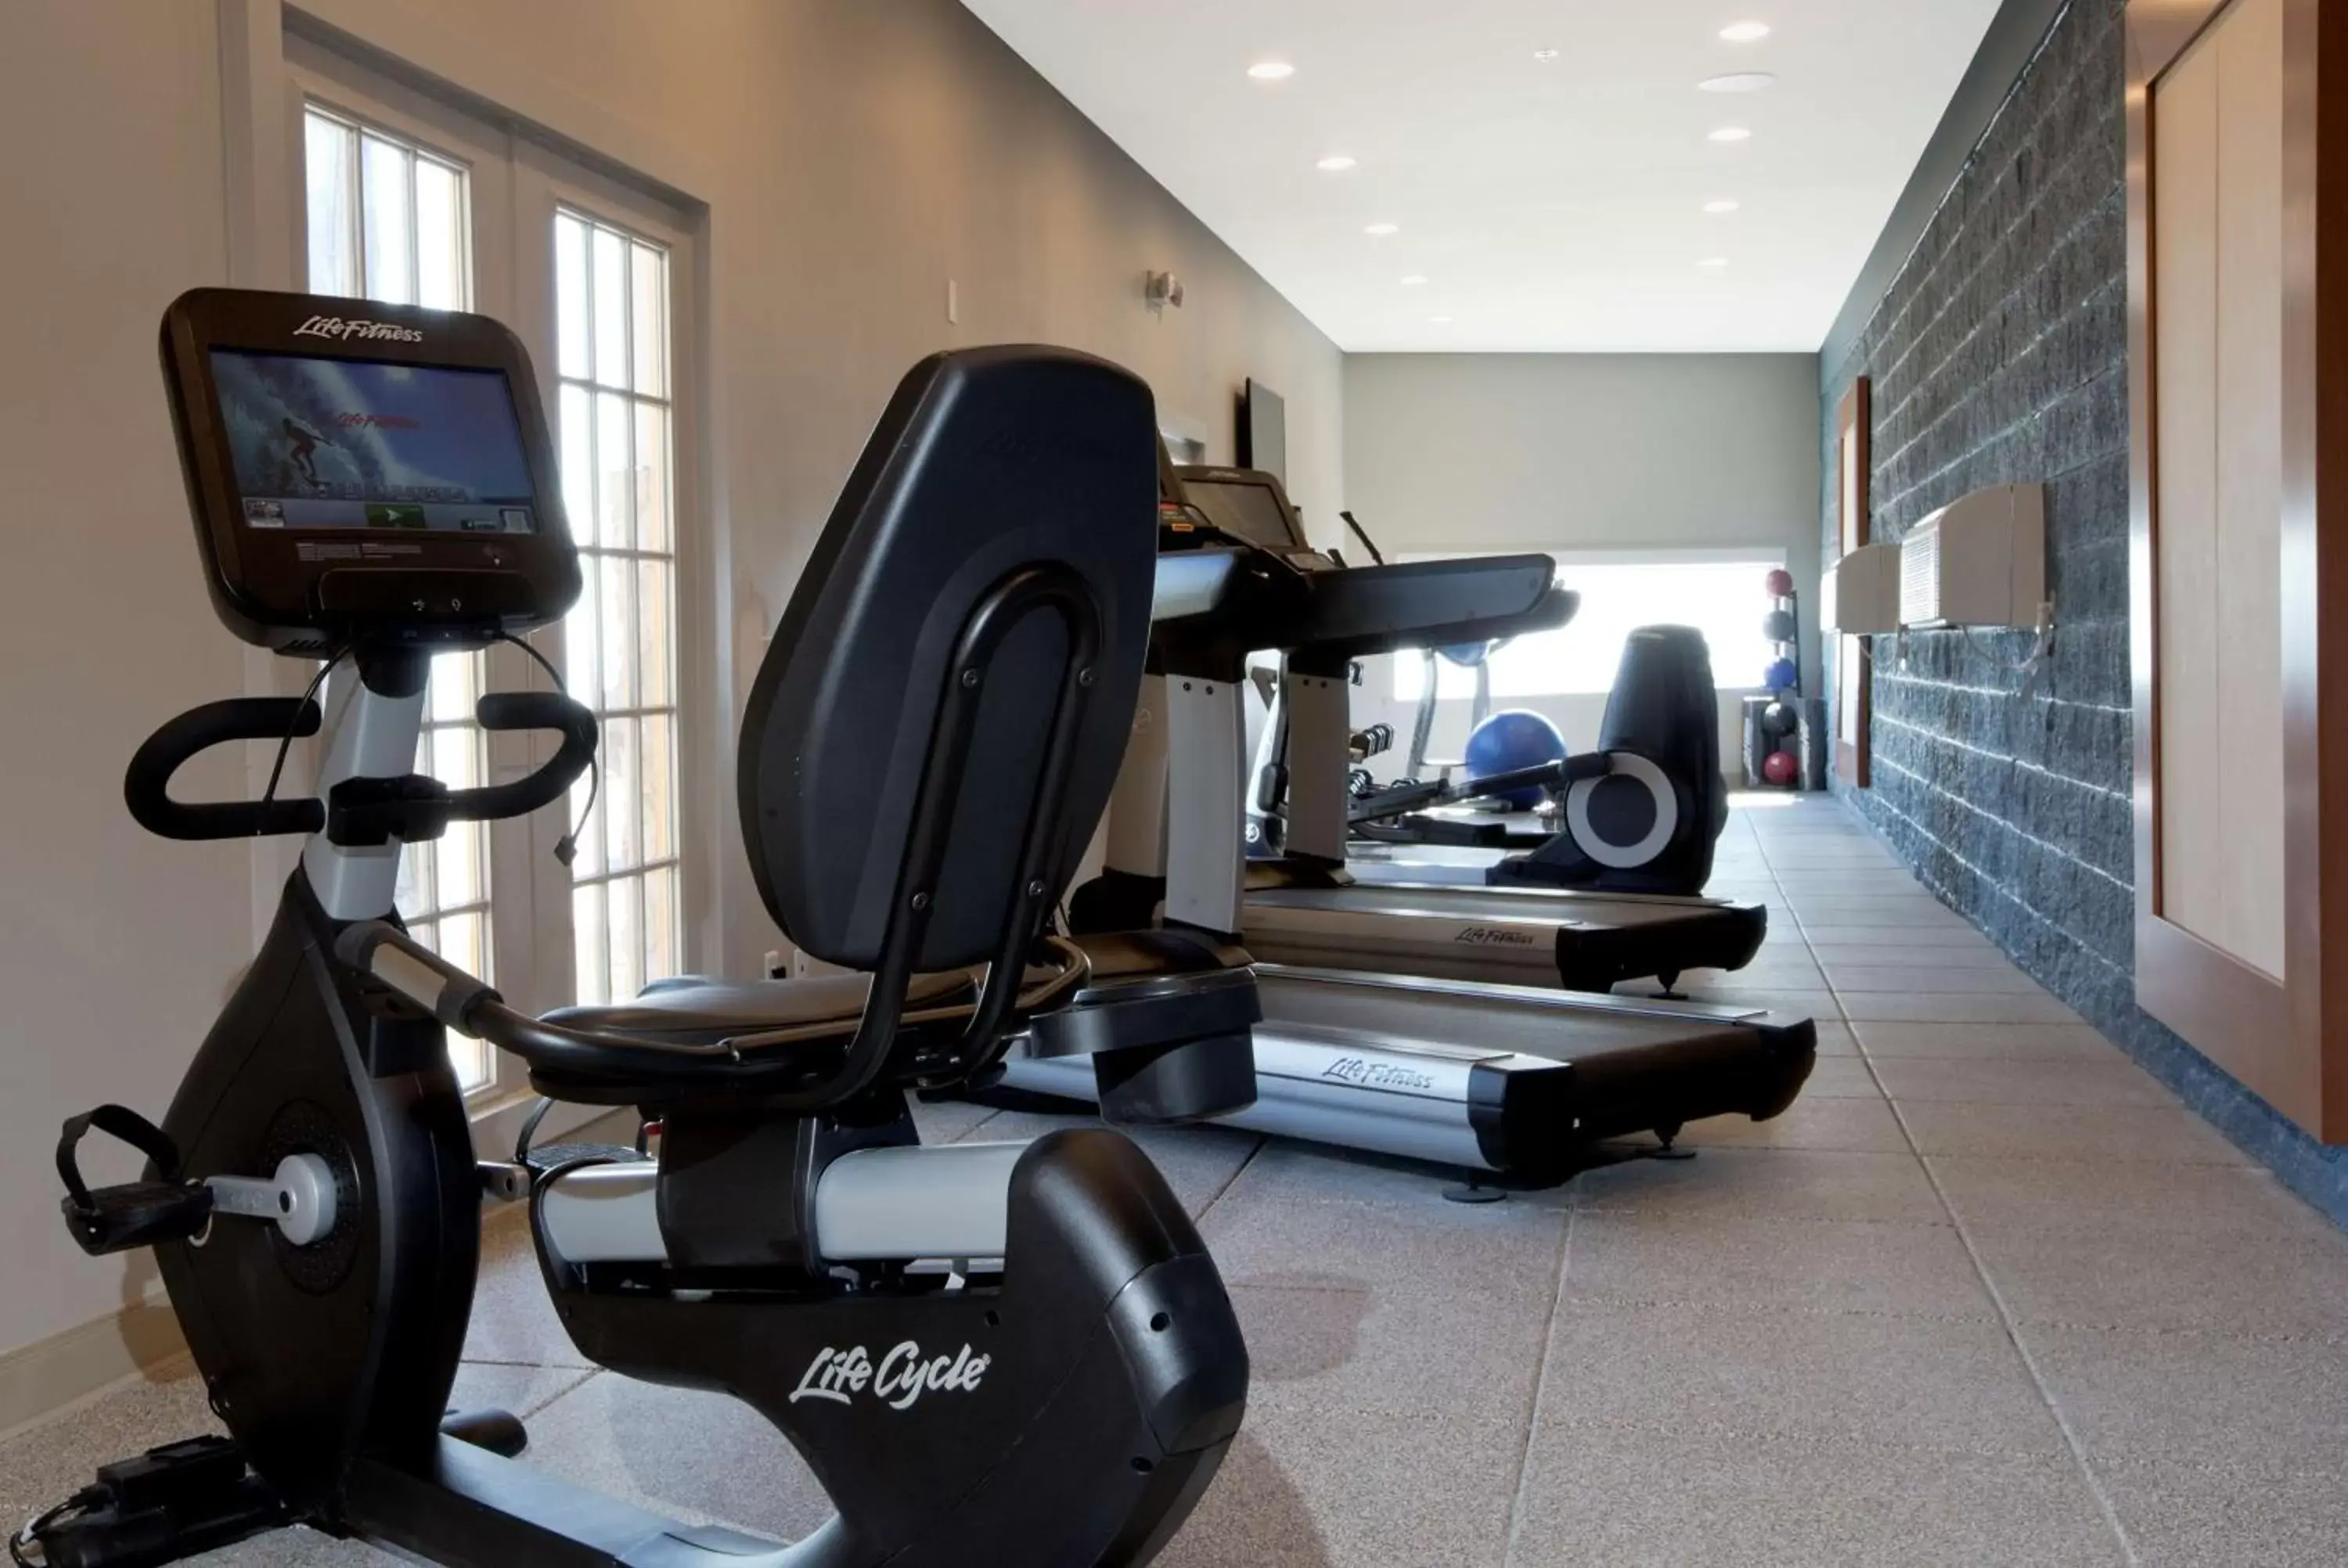 Fitness centre/facilities, Fitness Center/Facilities in DoubleTree by Hilton Galveston Beach